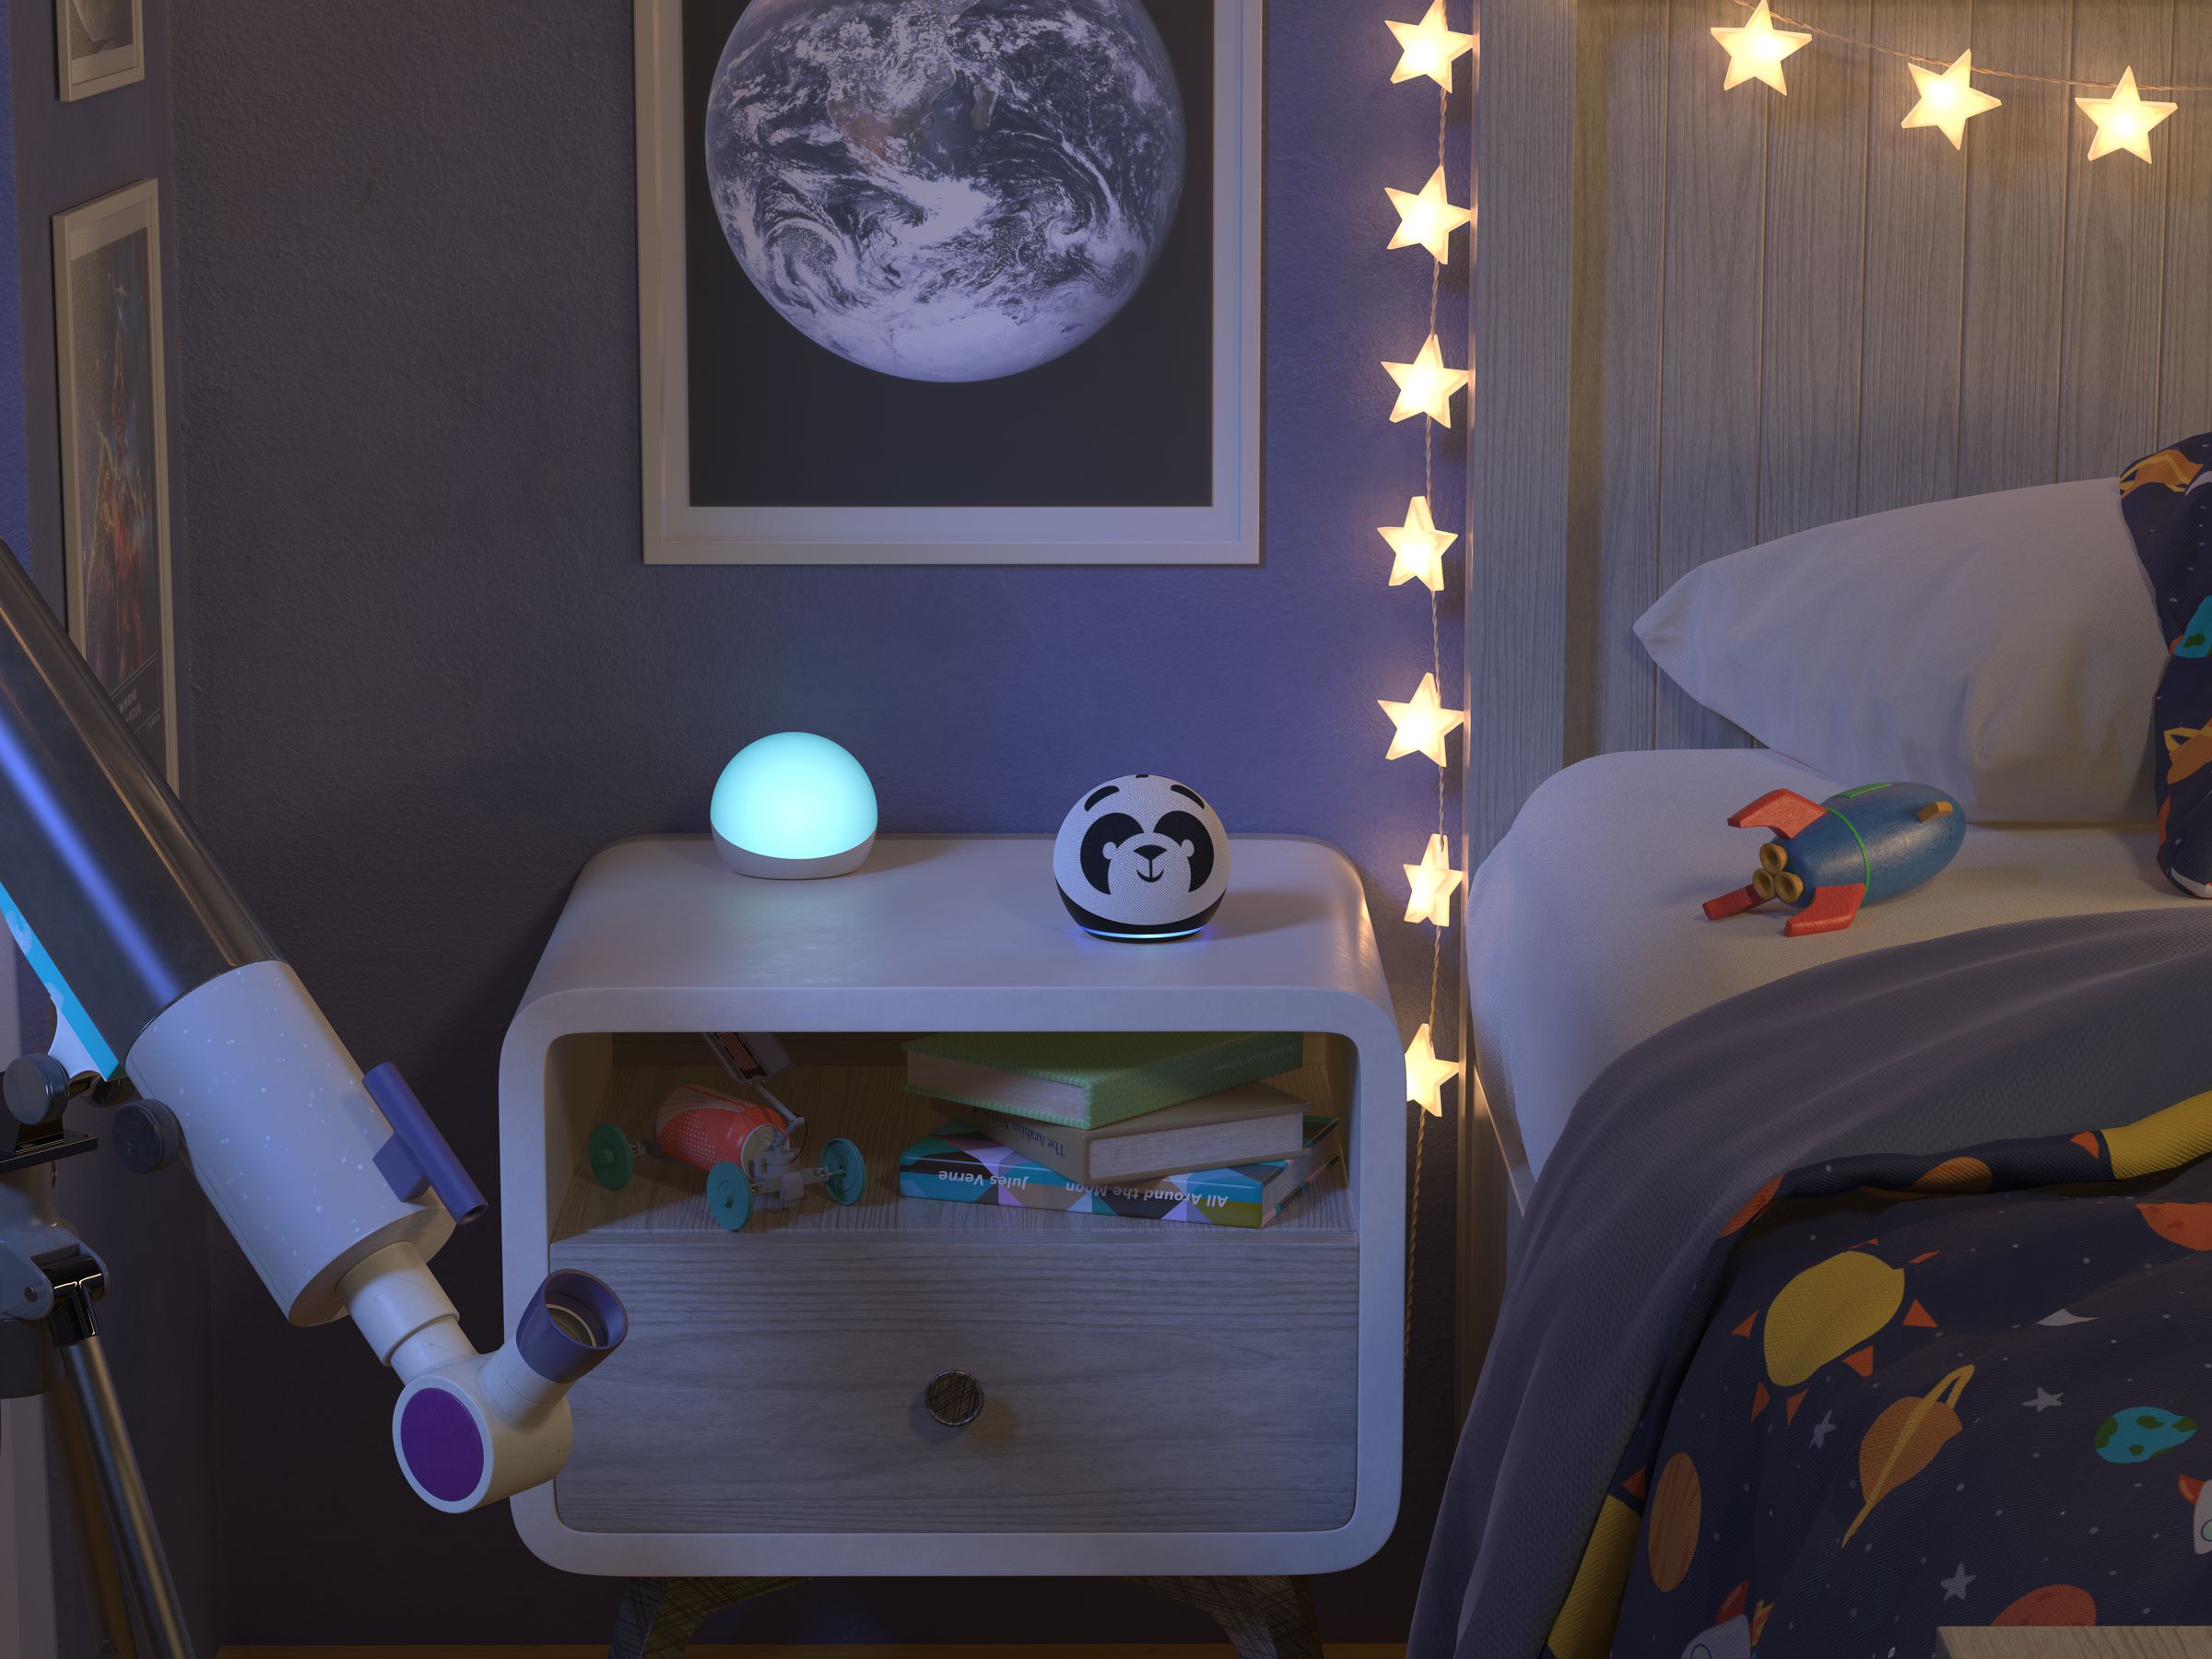 A Bedtime Routine on a Kids Echo Dot in a child’s room is a great way to help wind down at bedtime. Set it to slowly dim the lights, read an Audible book, and finish up with some sleep sounds. 